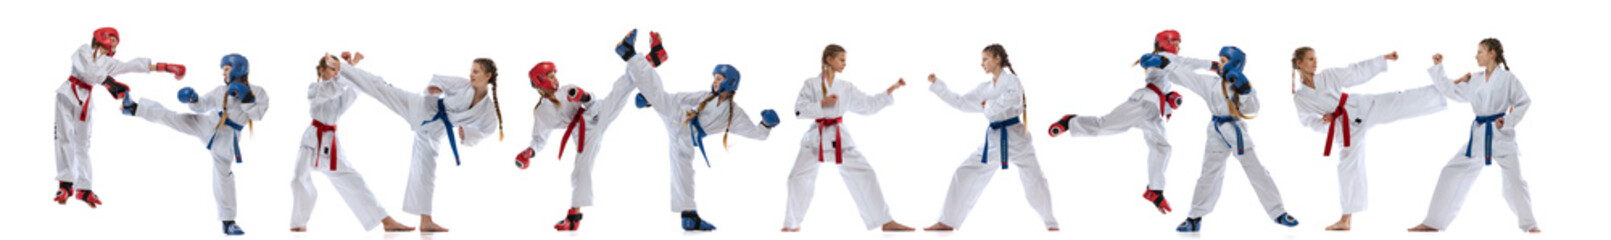 Horizontal flyer with images of two young girls, teens, taekwondo athletes wearing doboks and sports uniforms isolated on white background. Collage, set